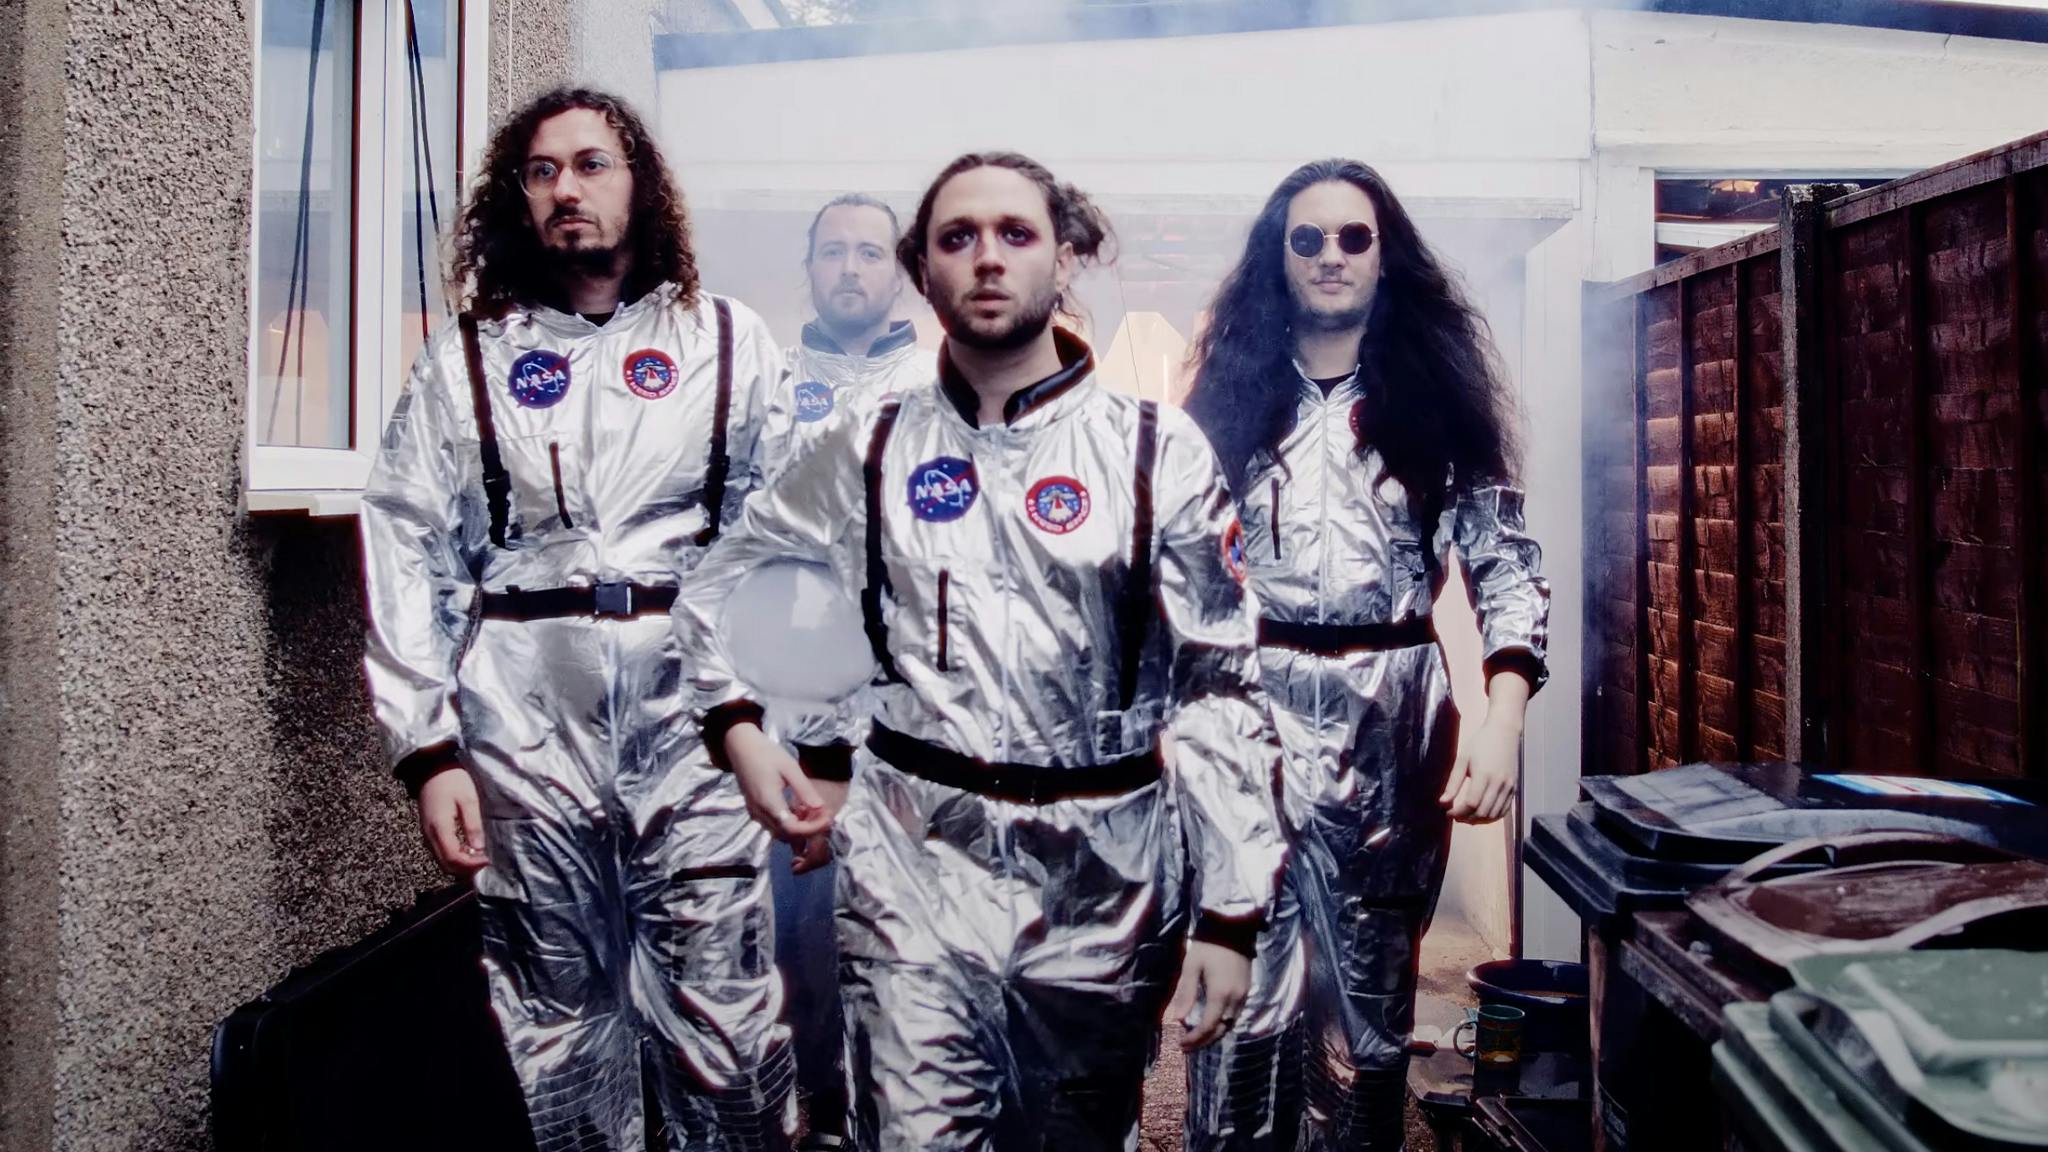 Watch the video for El Moono’s new single, The First Man On Mars